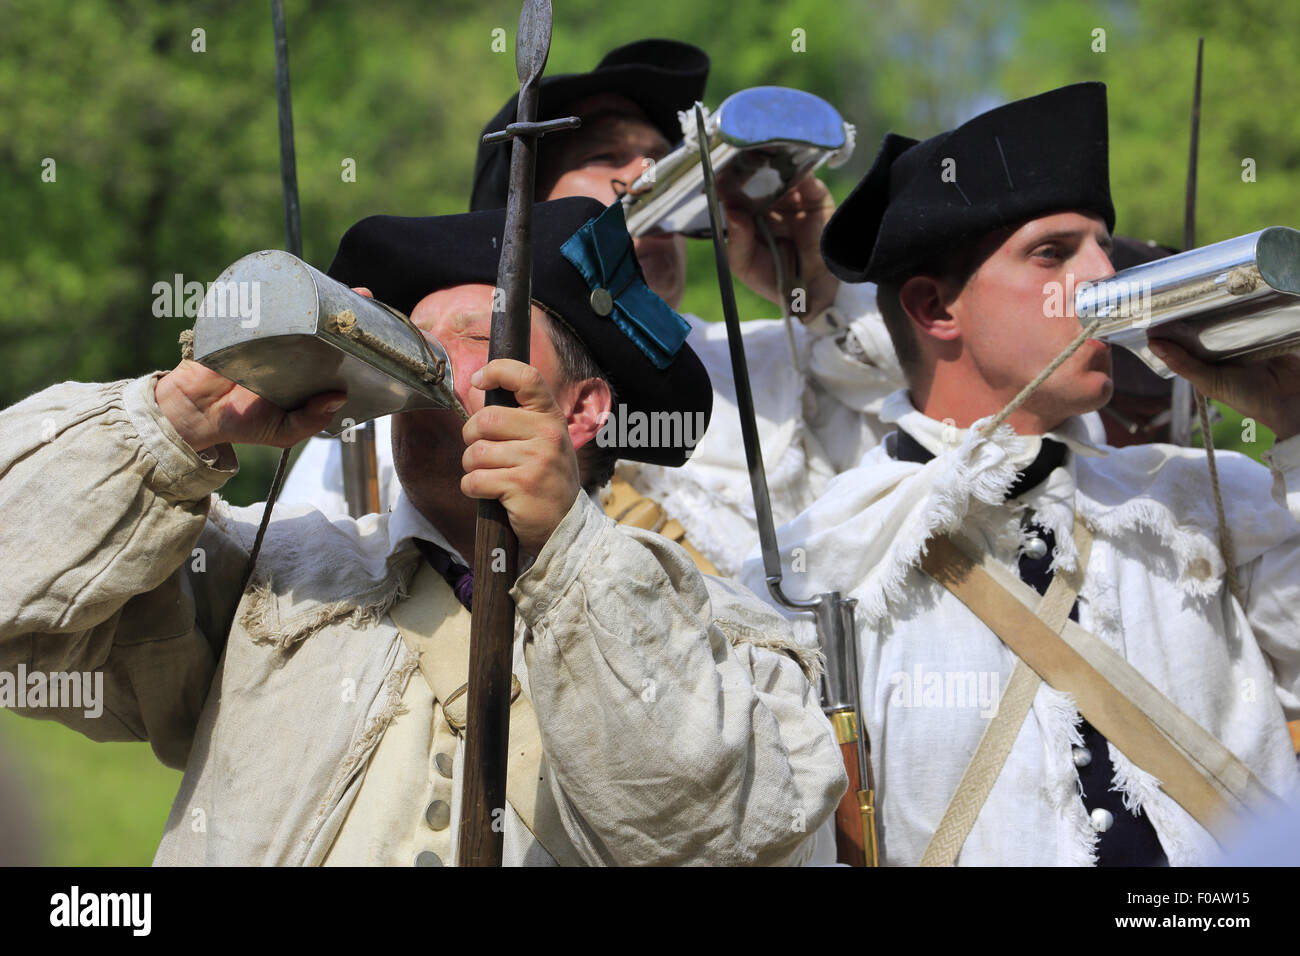 Soldiers of Continental Army drinking from flask in Revolutionary War reenactment in Jockey Hollow,Morristown National Historical Park NJ USA Stock Photo